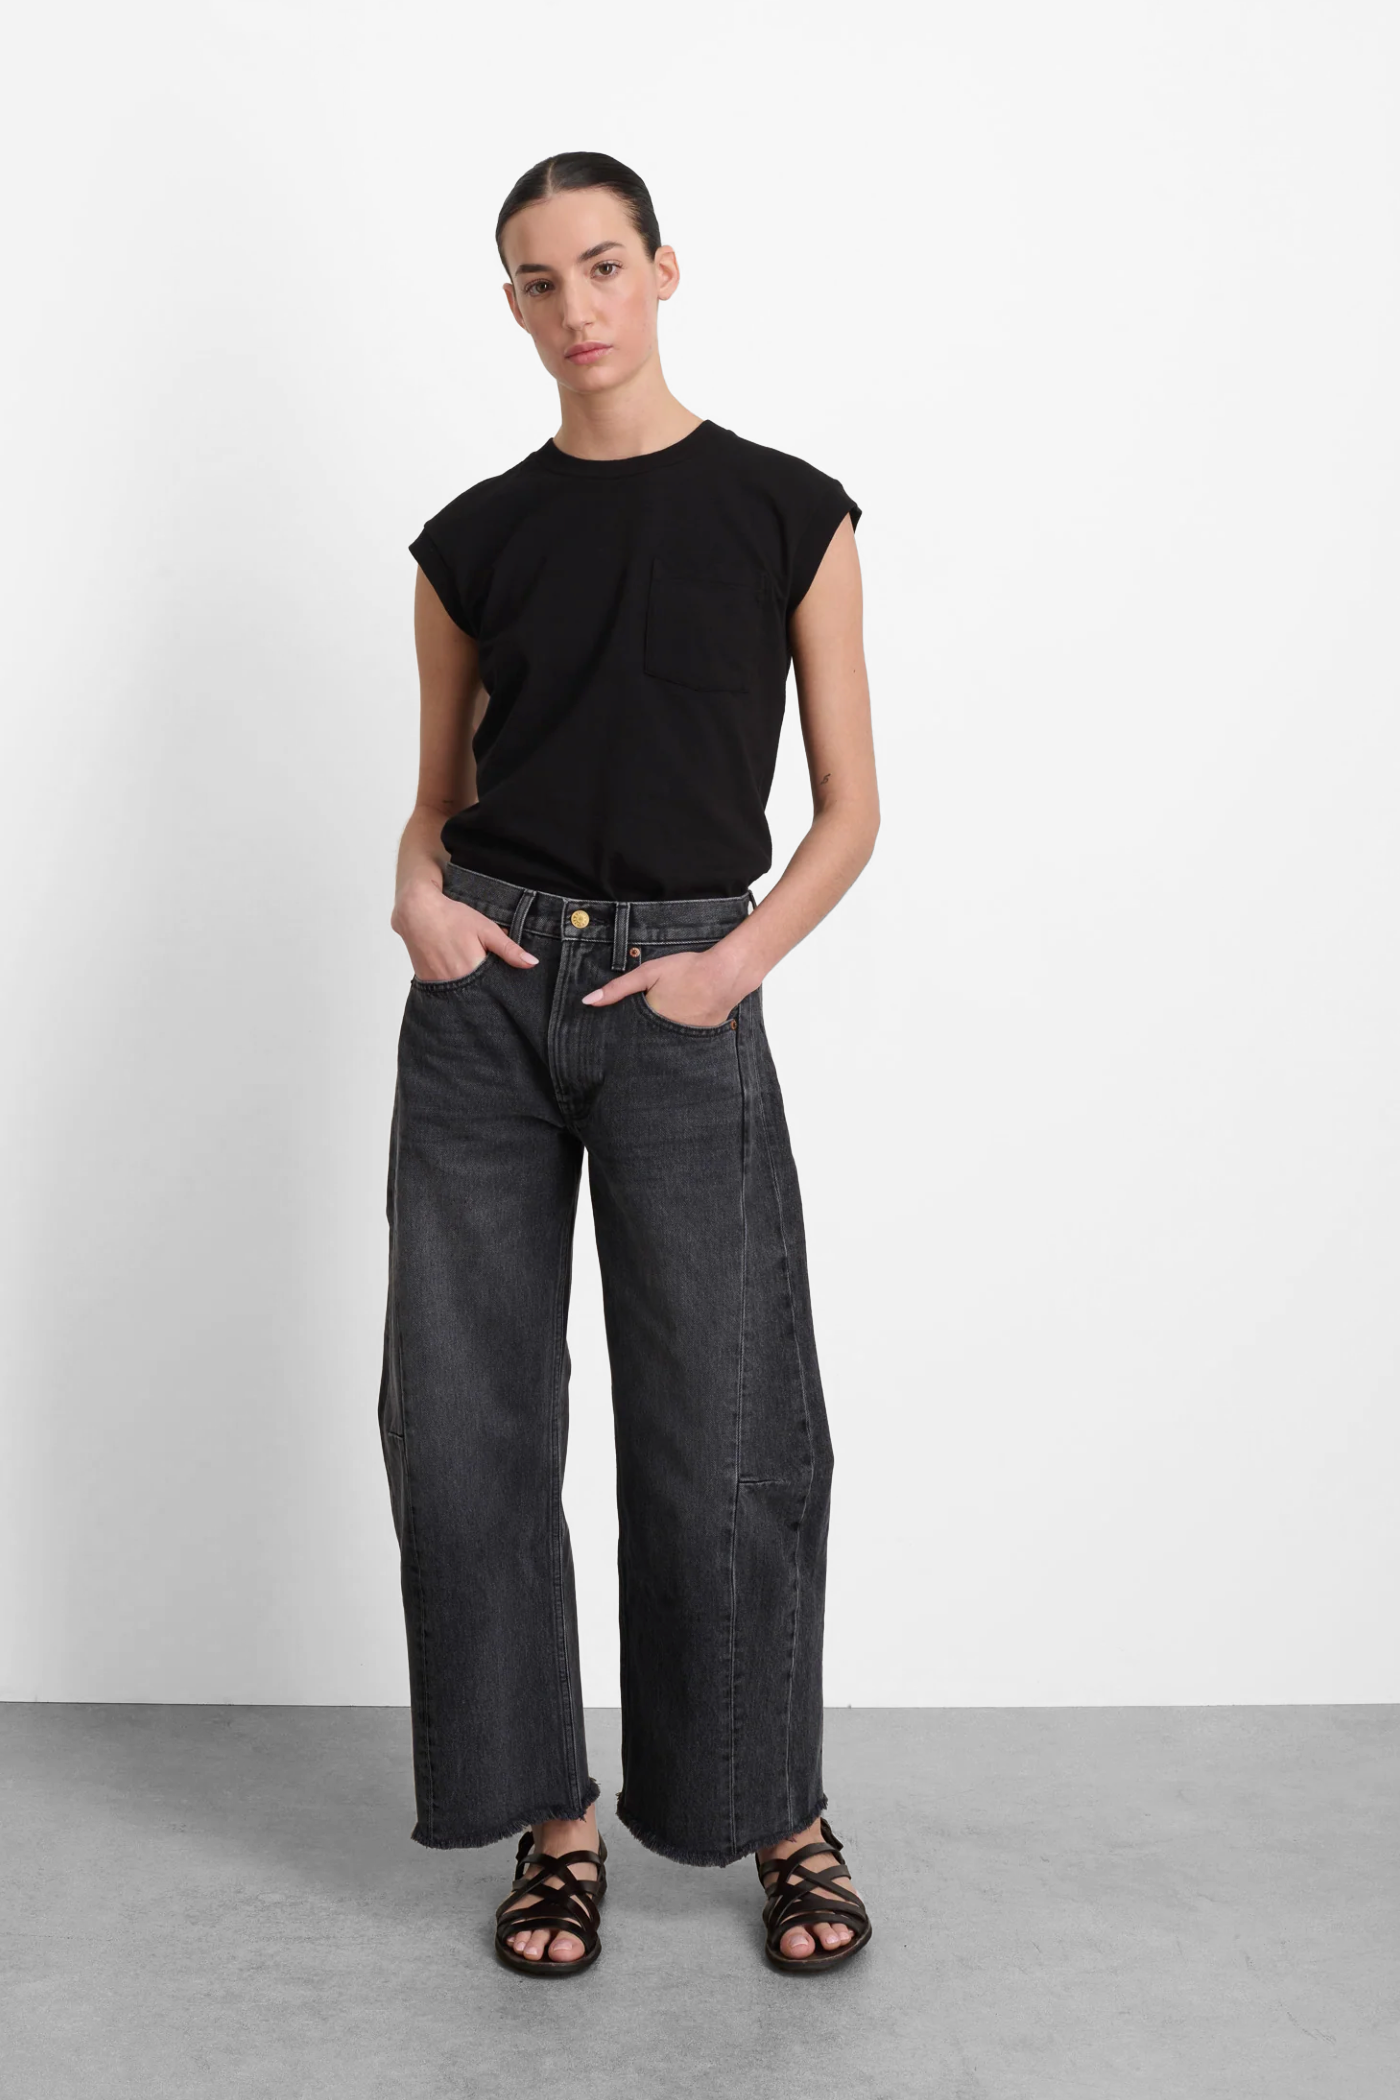 Relaxed Lasso Jean in Stil Black by B Sides